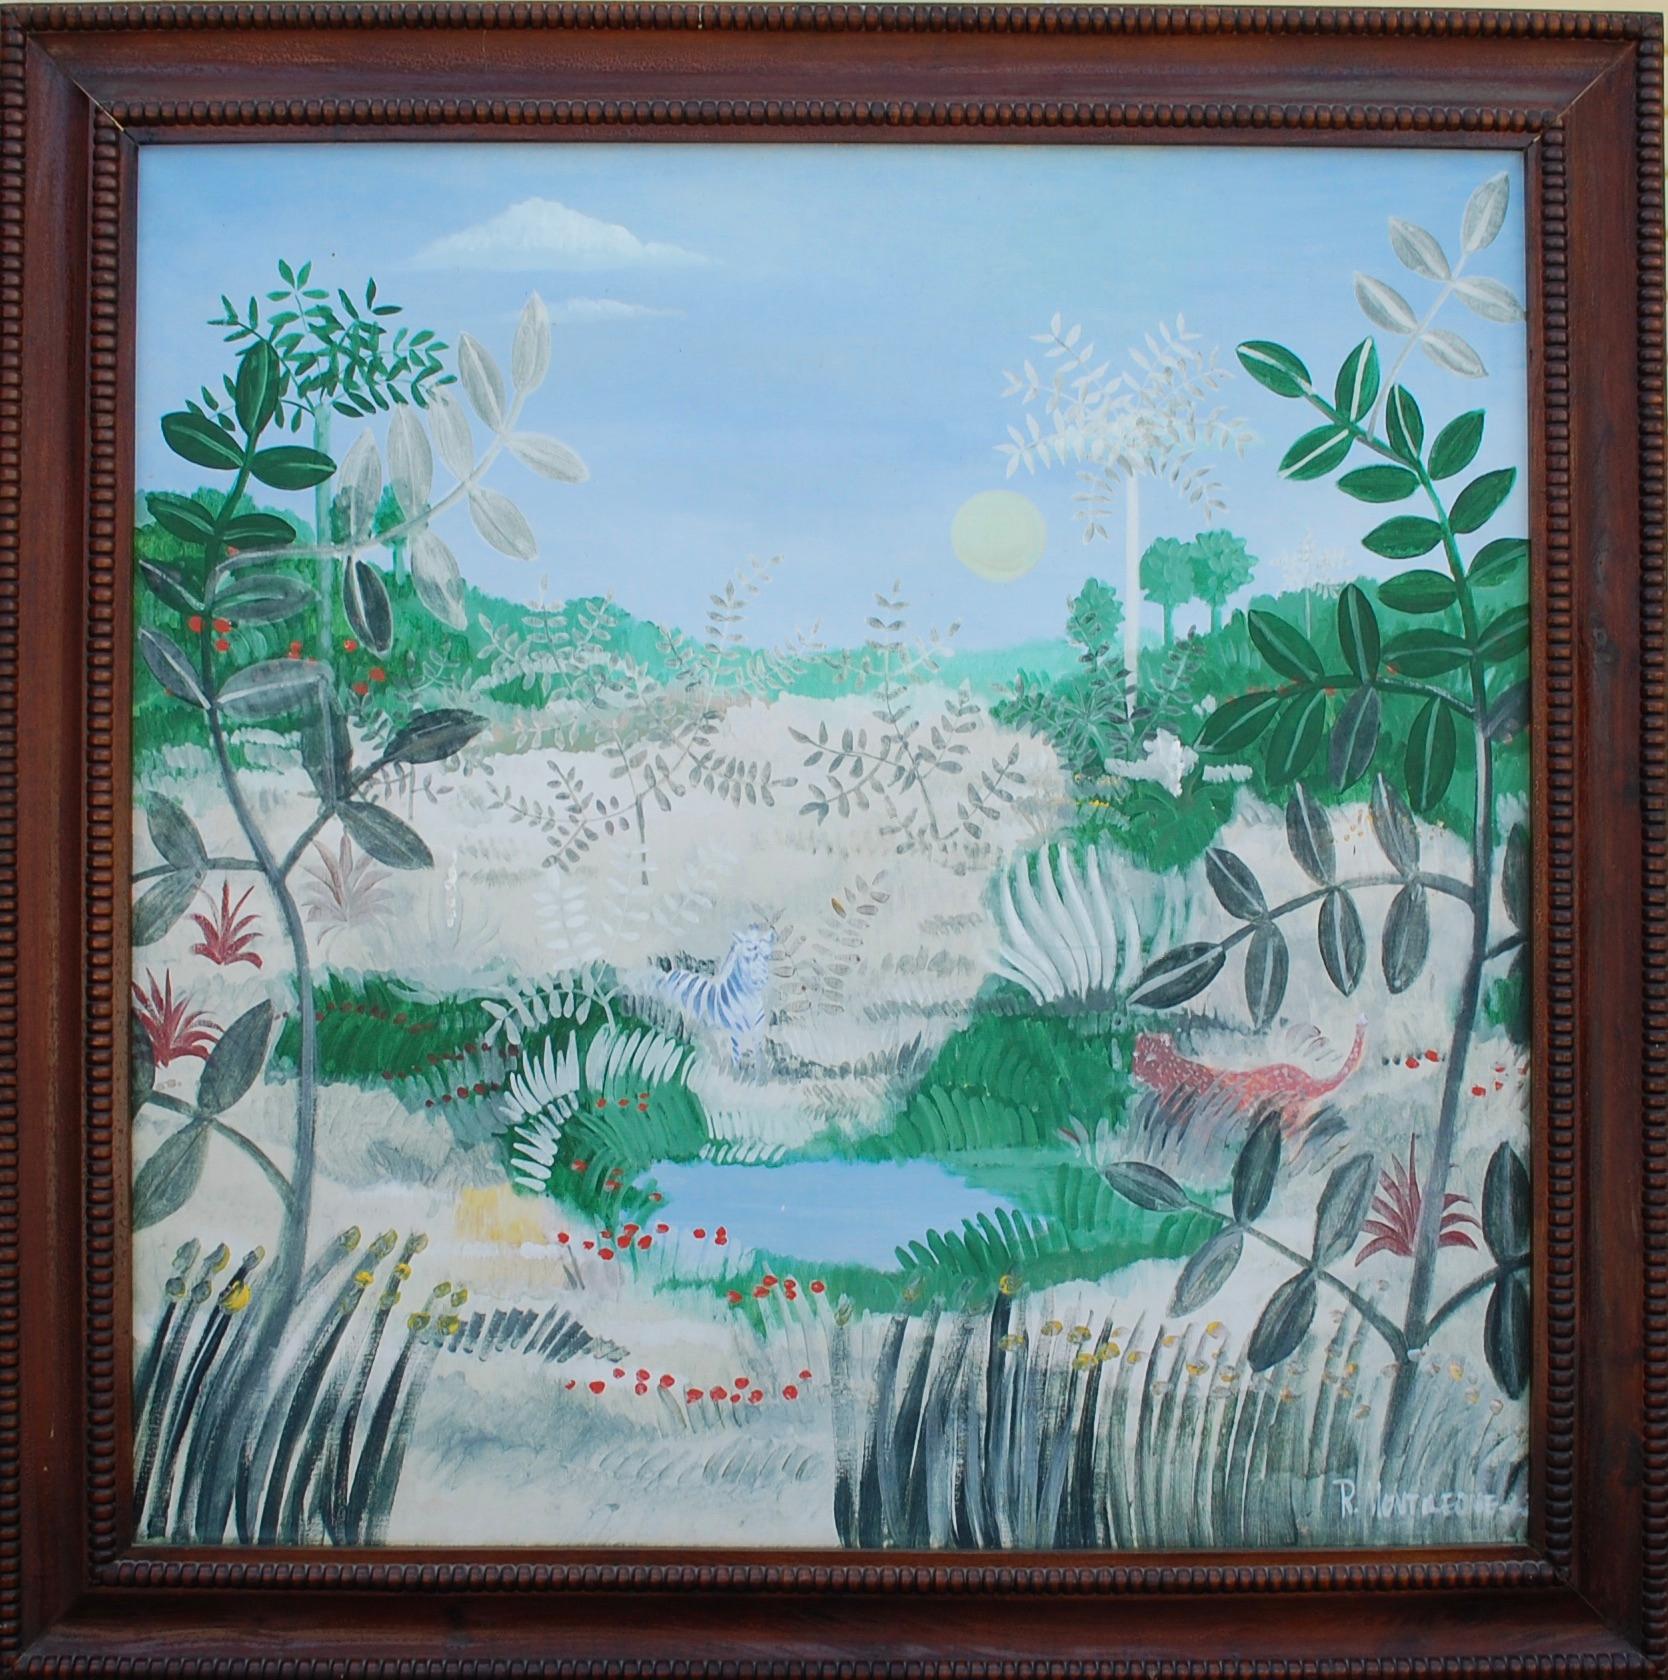 R. Montileone Landscape Painting - Jungle With Tiger Exotic Large Oil Painting